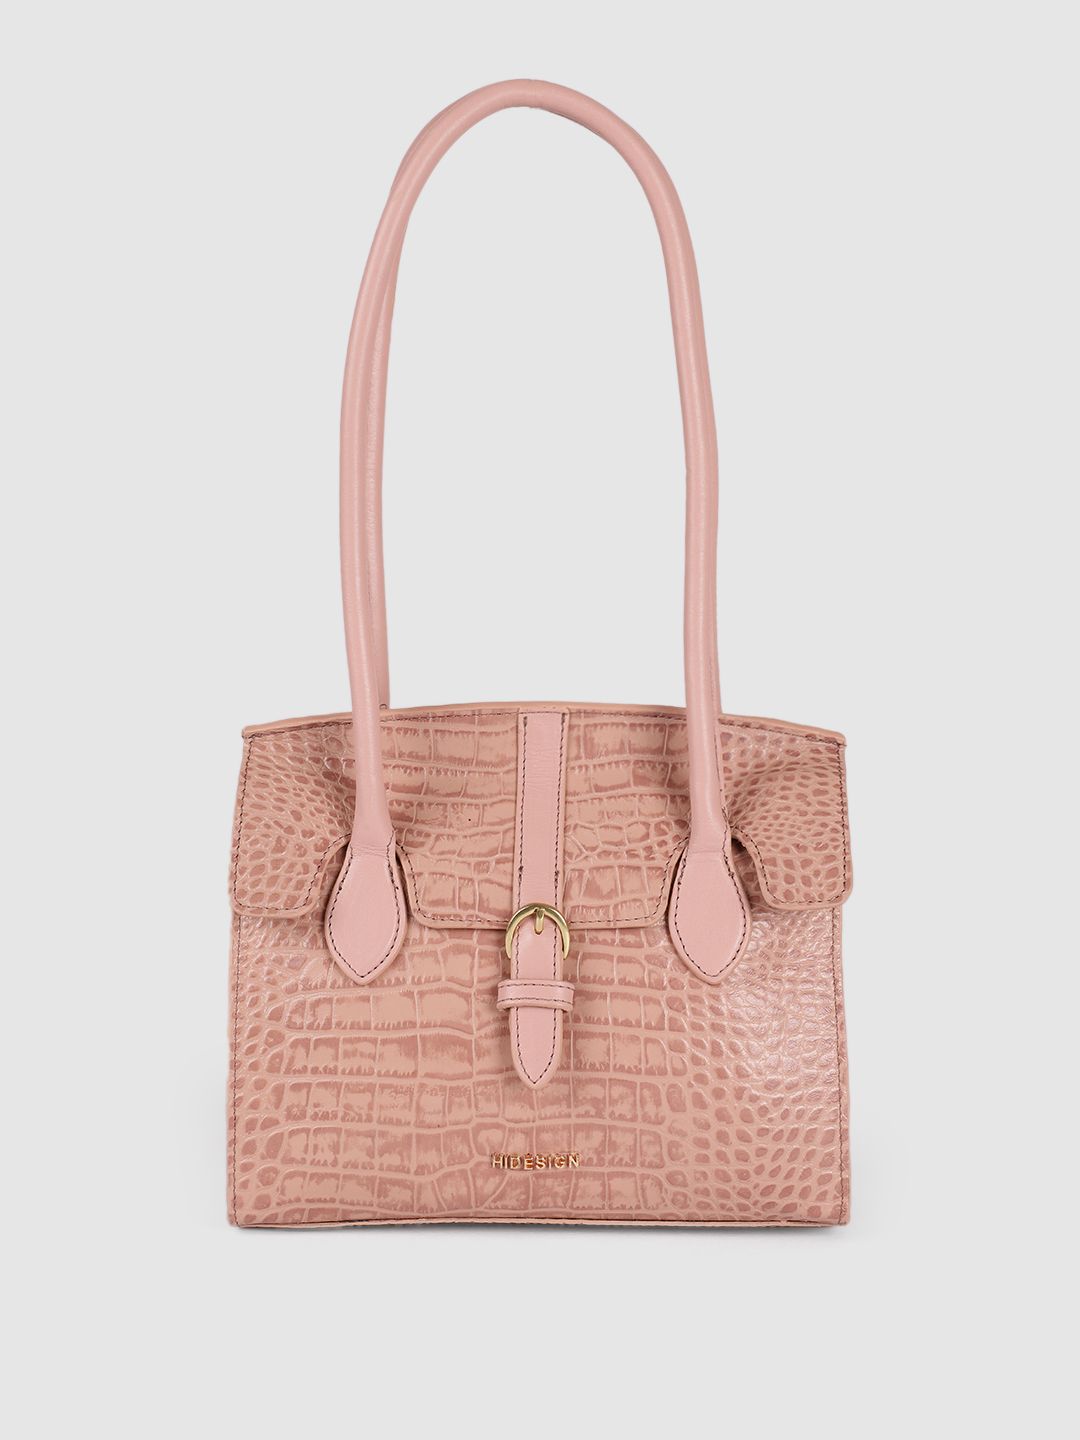 Hidesign Women Pink Textured Leather Shoulder Bag Price in India